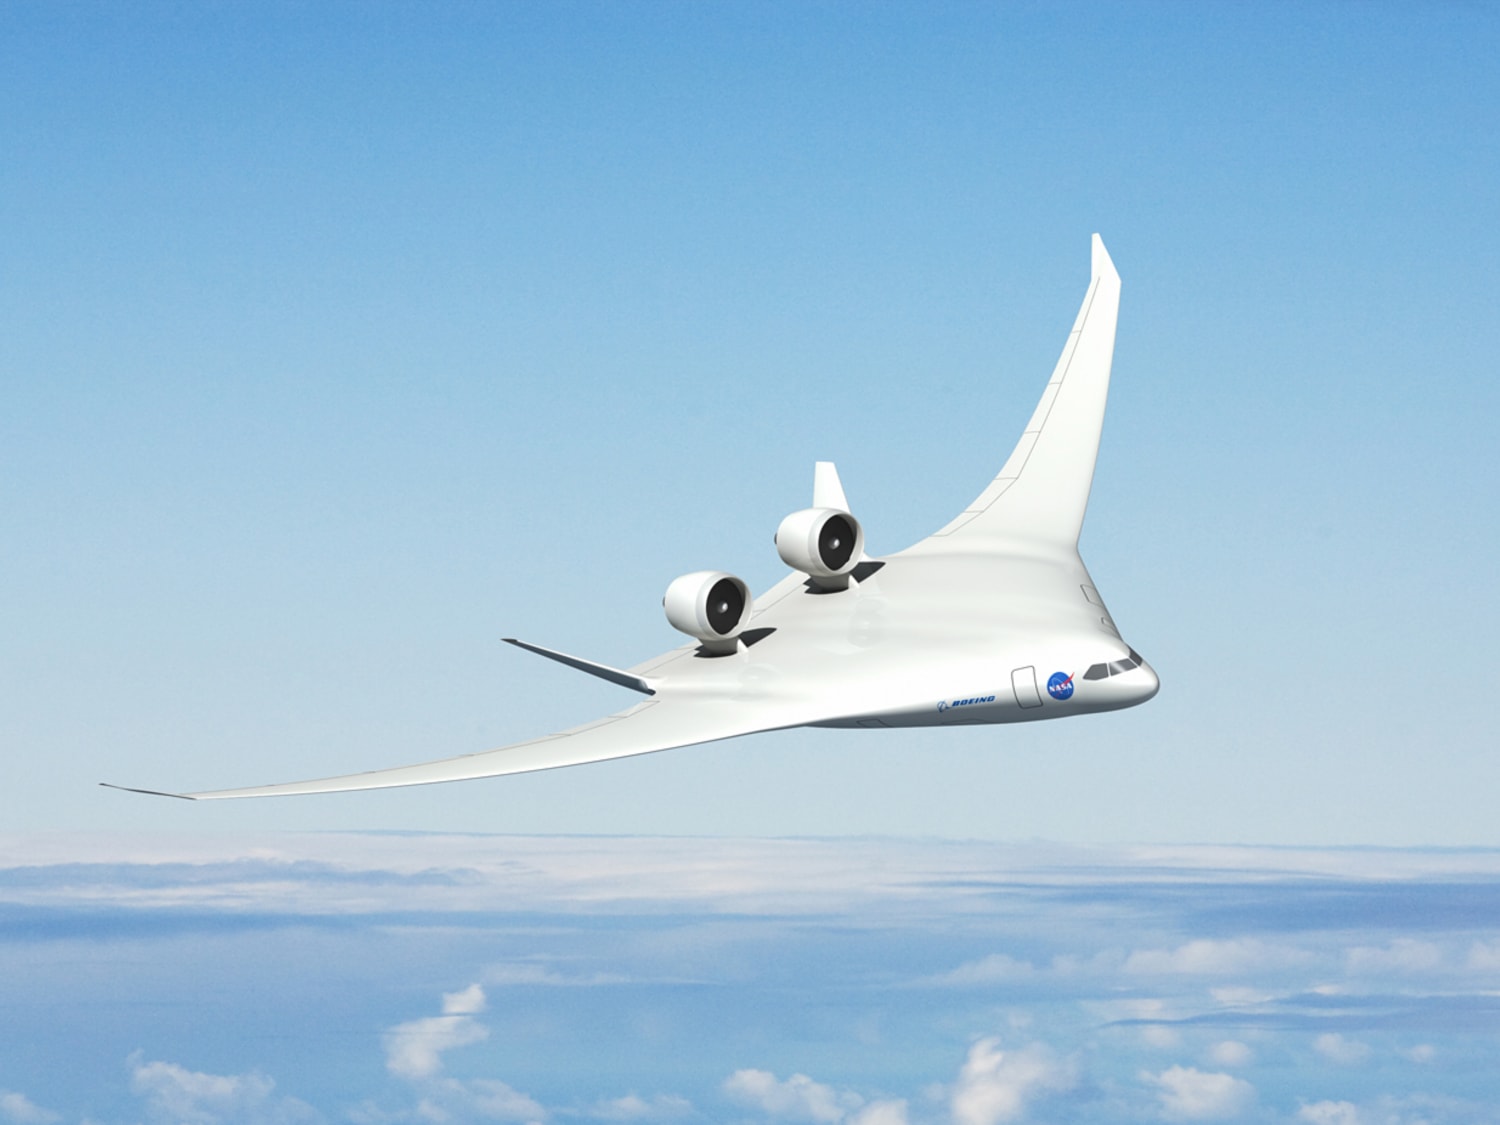 Airliners of the Future May Sport Some Very Unusual Designs